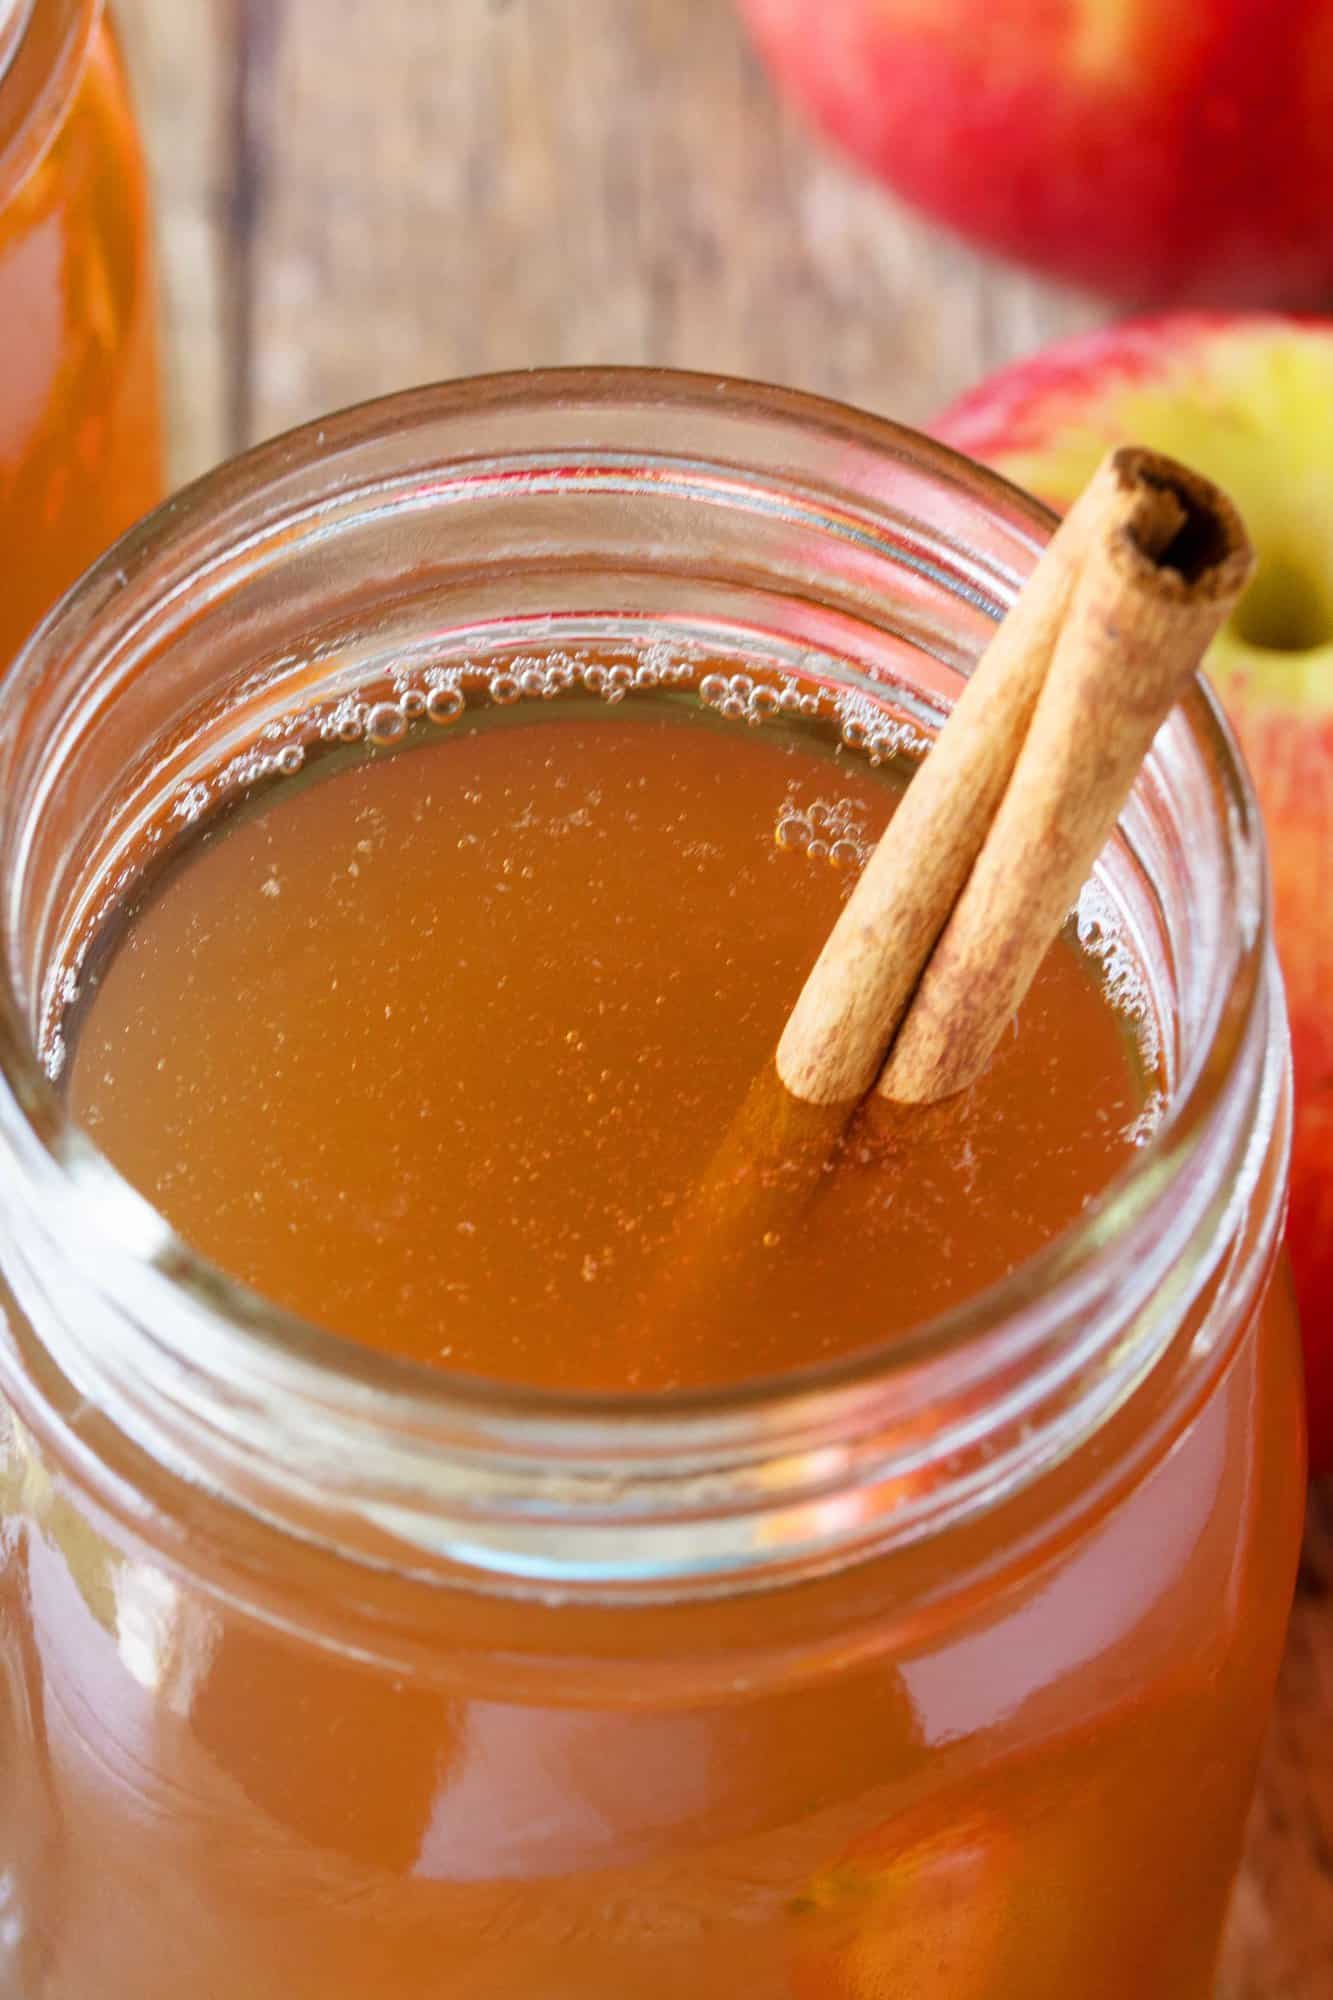 Cuddle up and stay warm with a mug of spiced apple cider. This Slow Cooker Apple Cider is made from scratch and can be frozen to enjoy all winter long!